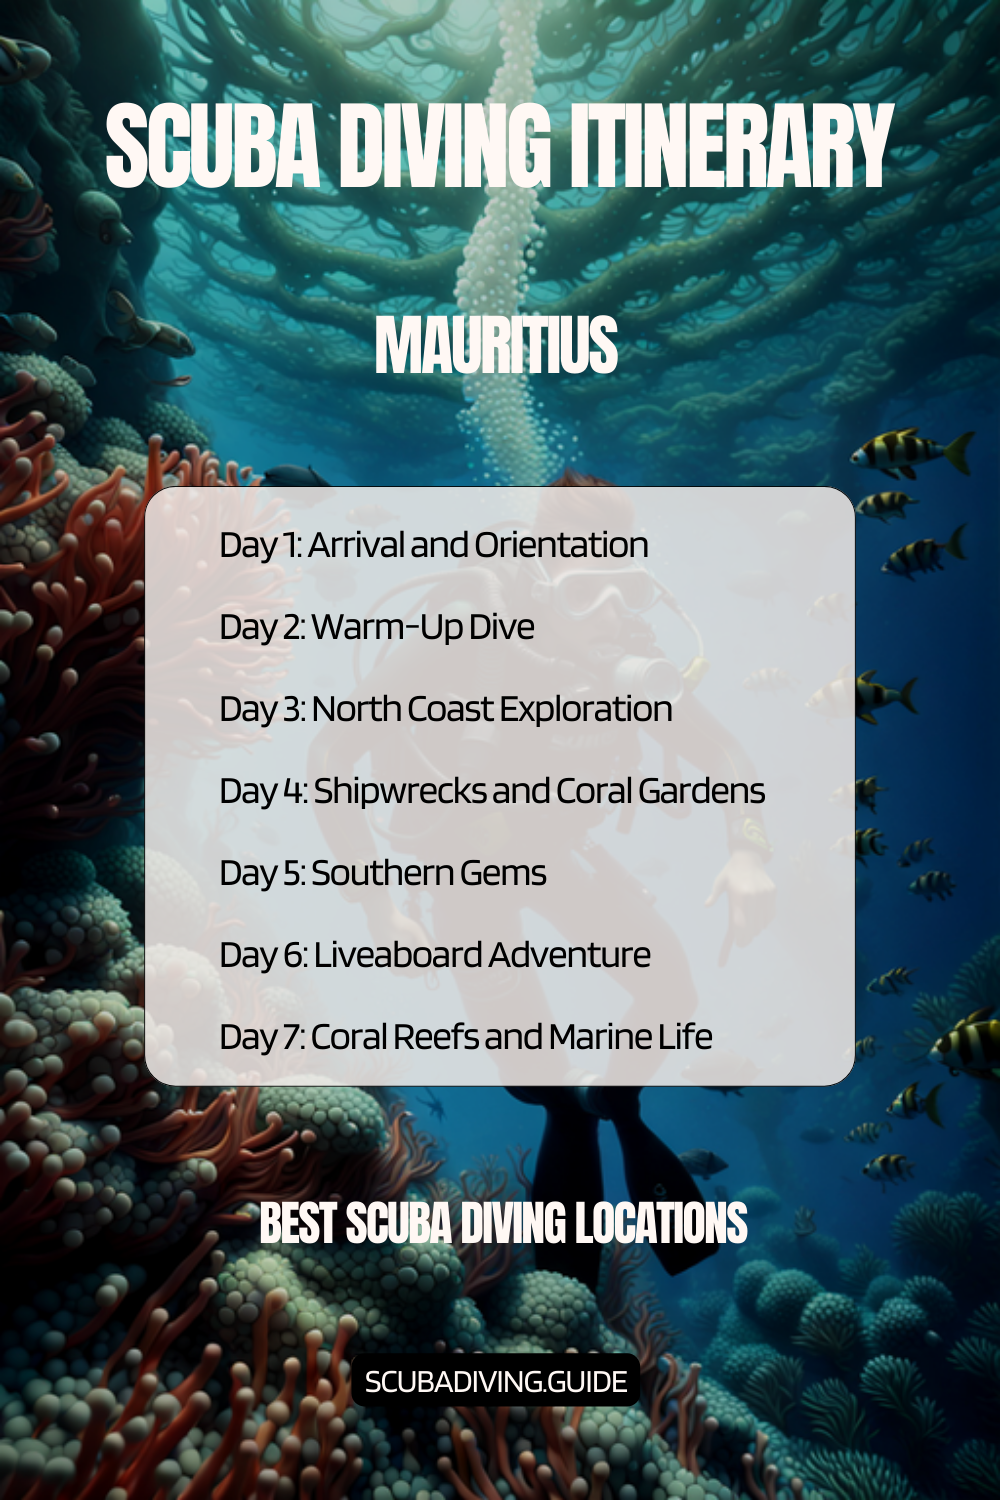 Mauritius Recommended Scuba Diving Itinerary